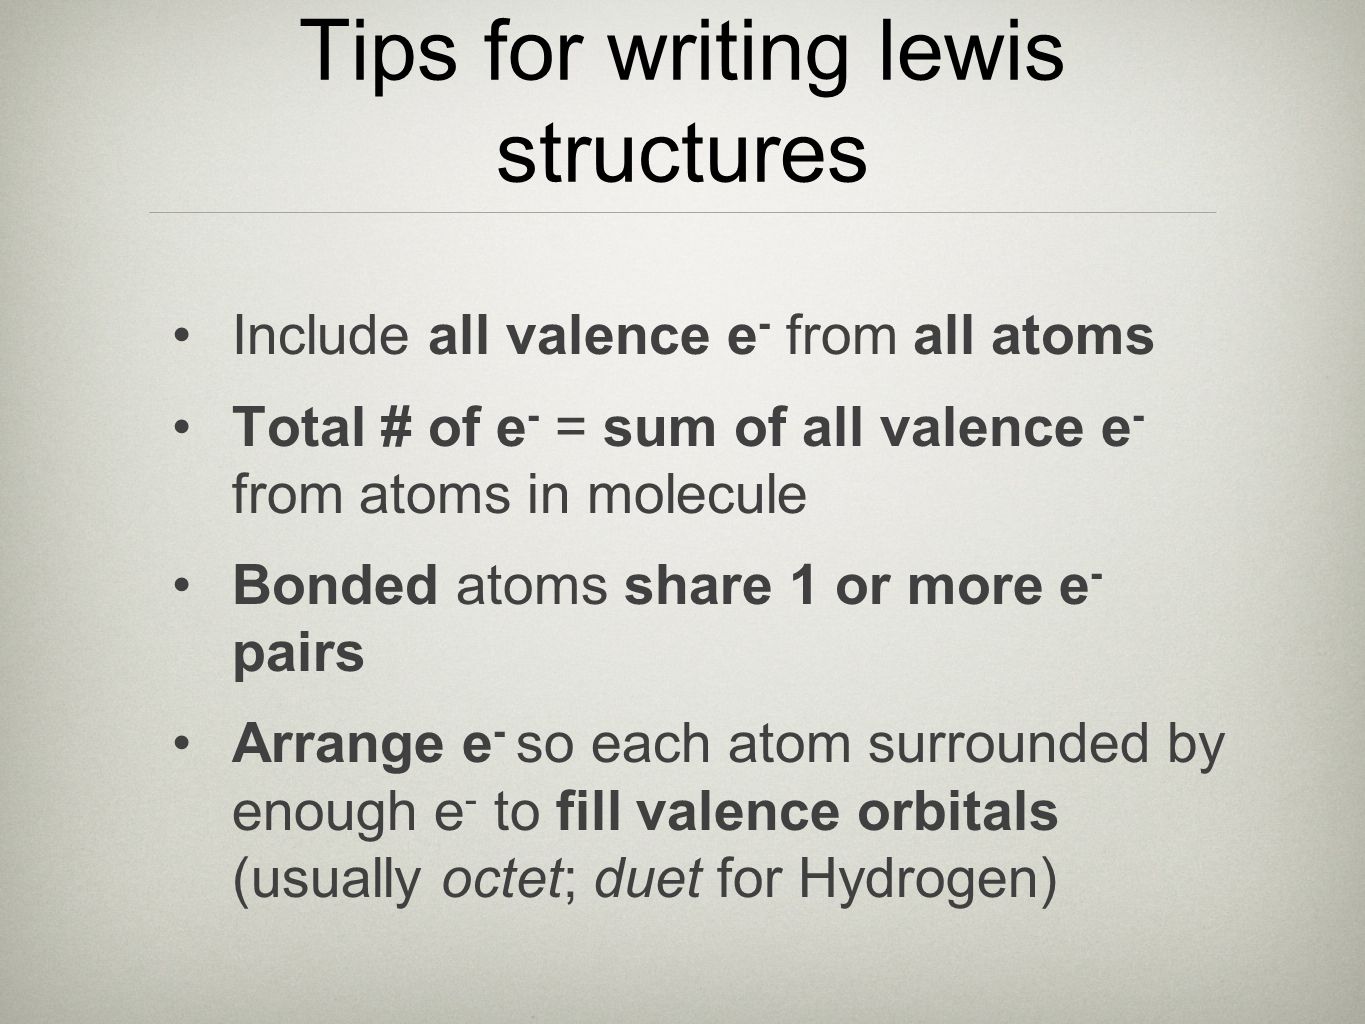 Tips for writing lewis structures